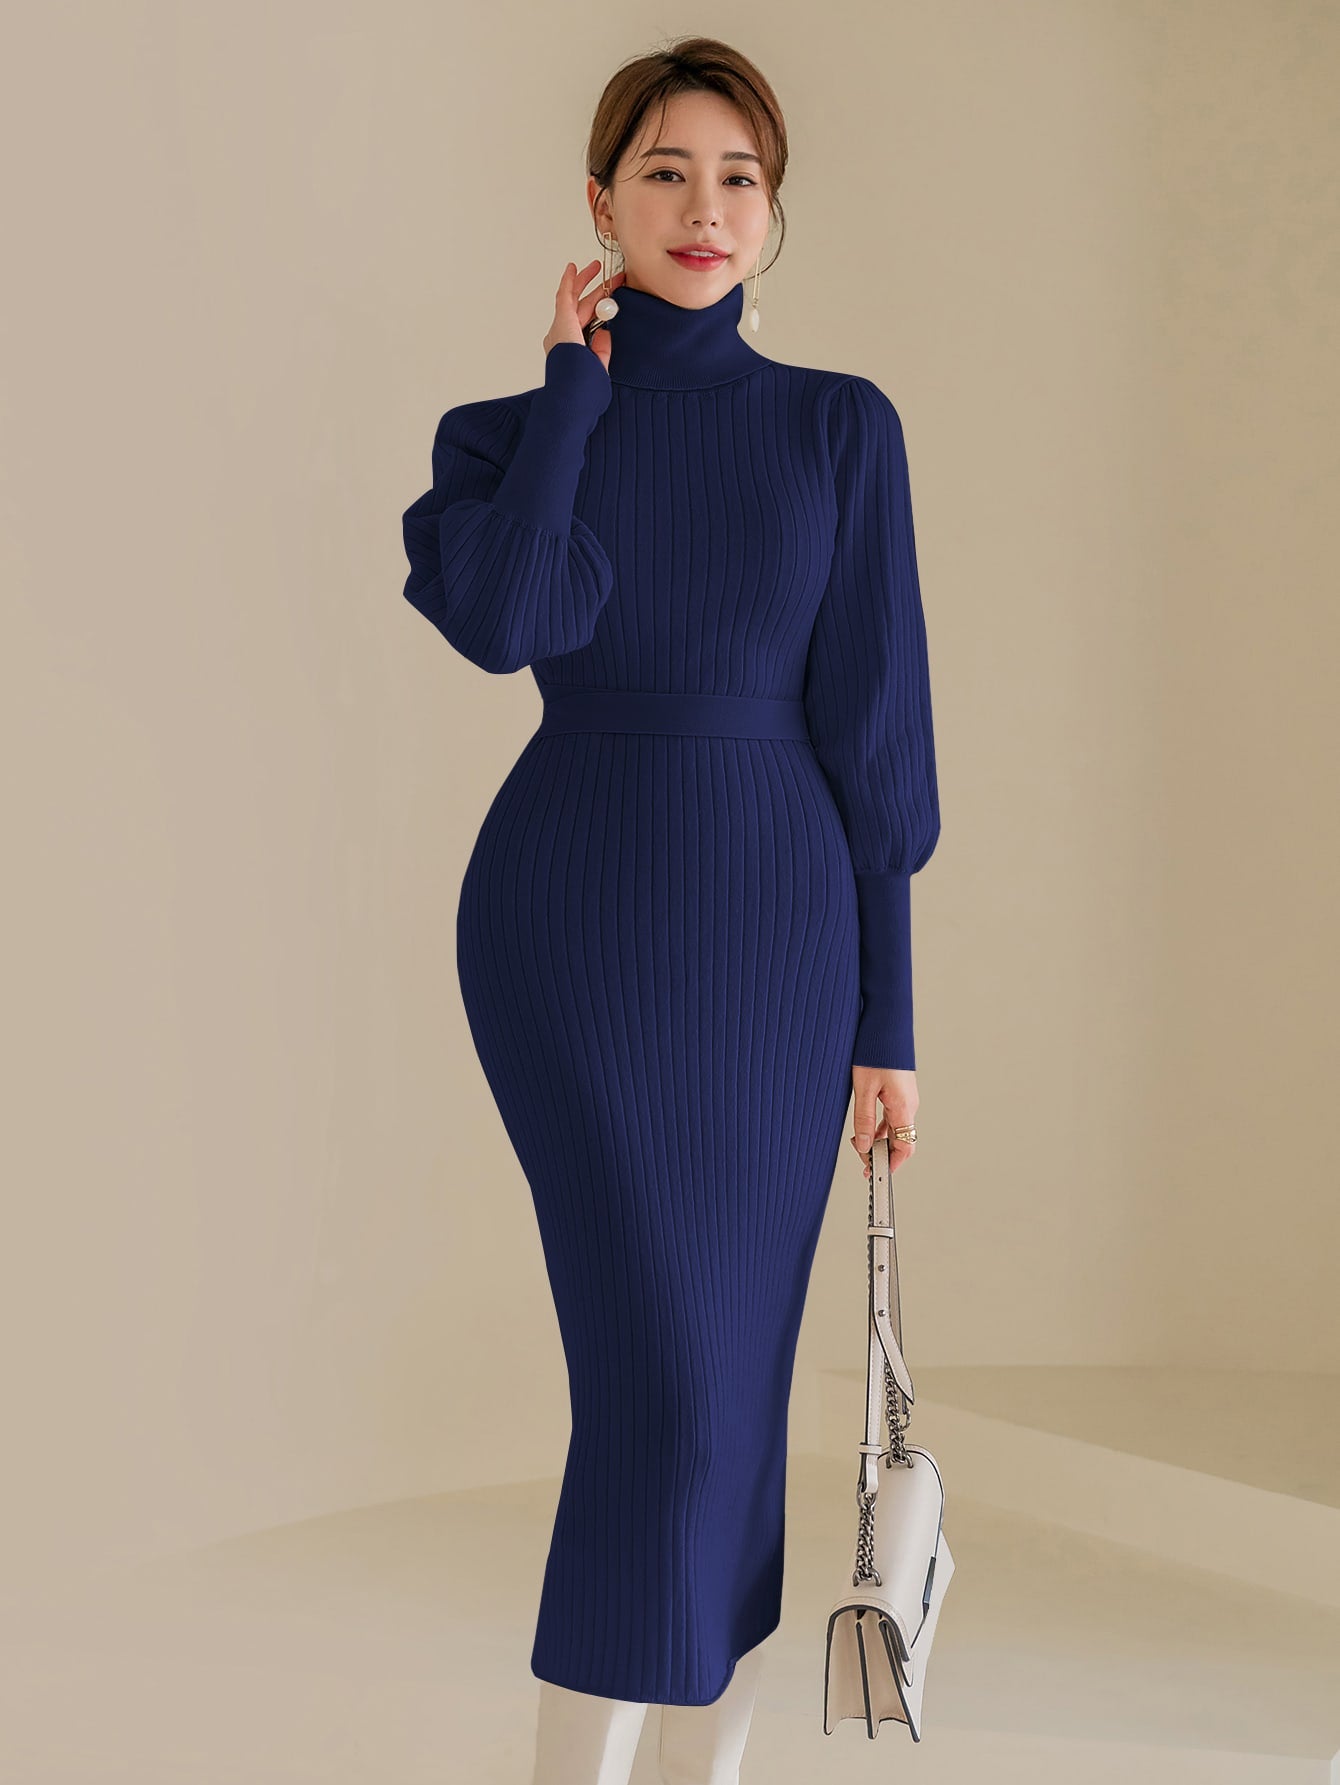 SHEIN Modely Turtle Neck Gigot Sleeve Belted Sweater Dress